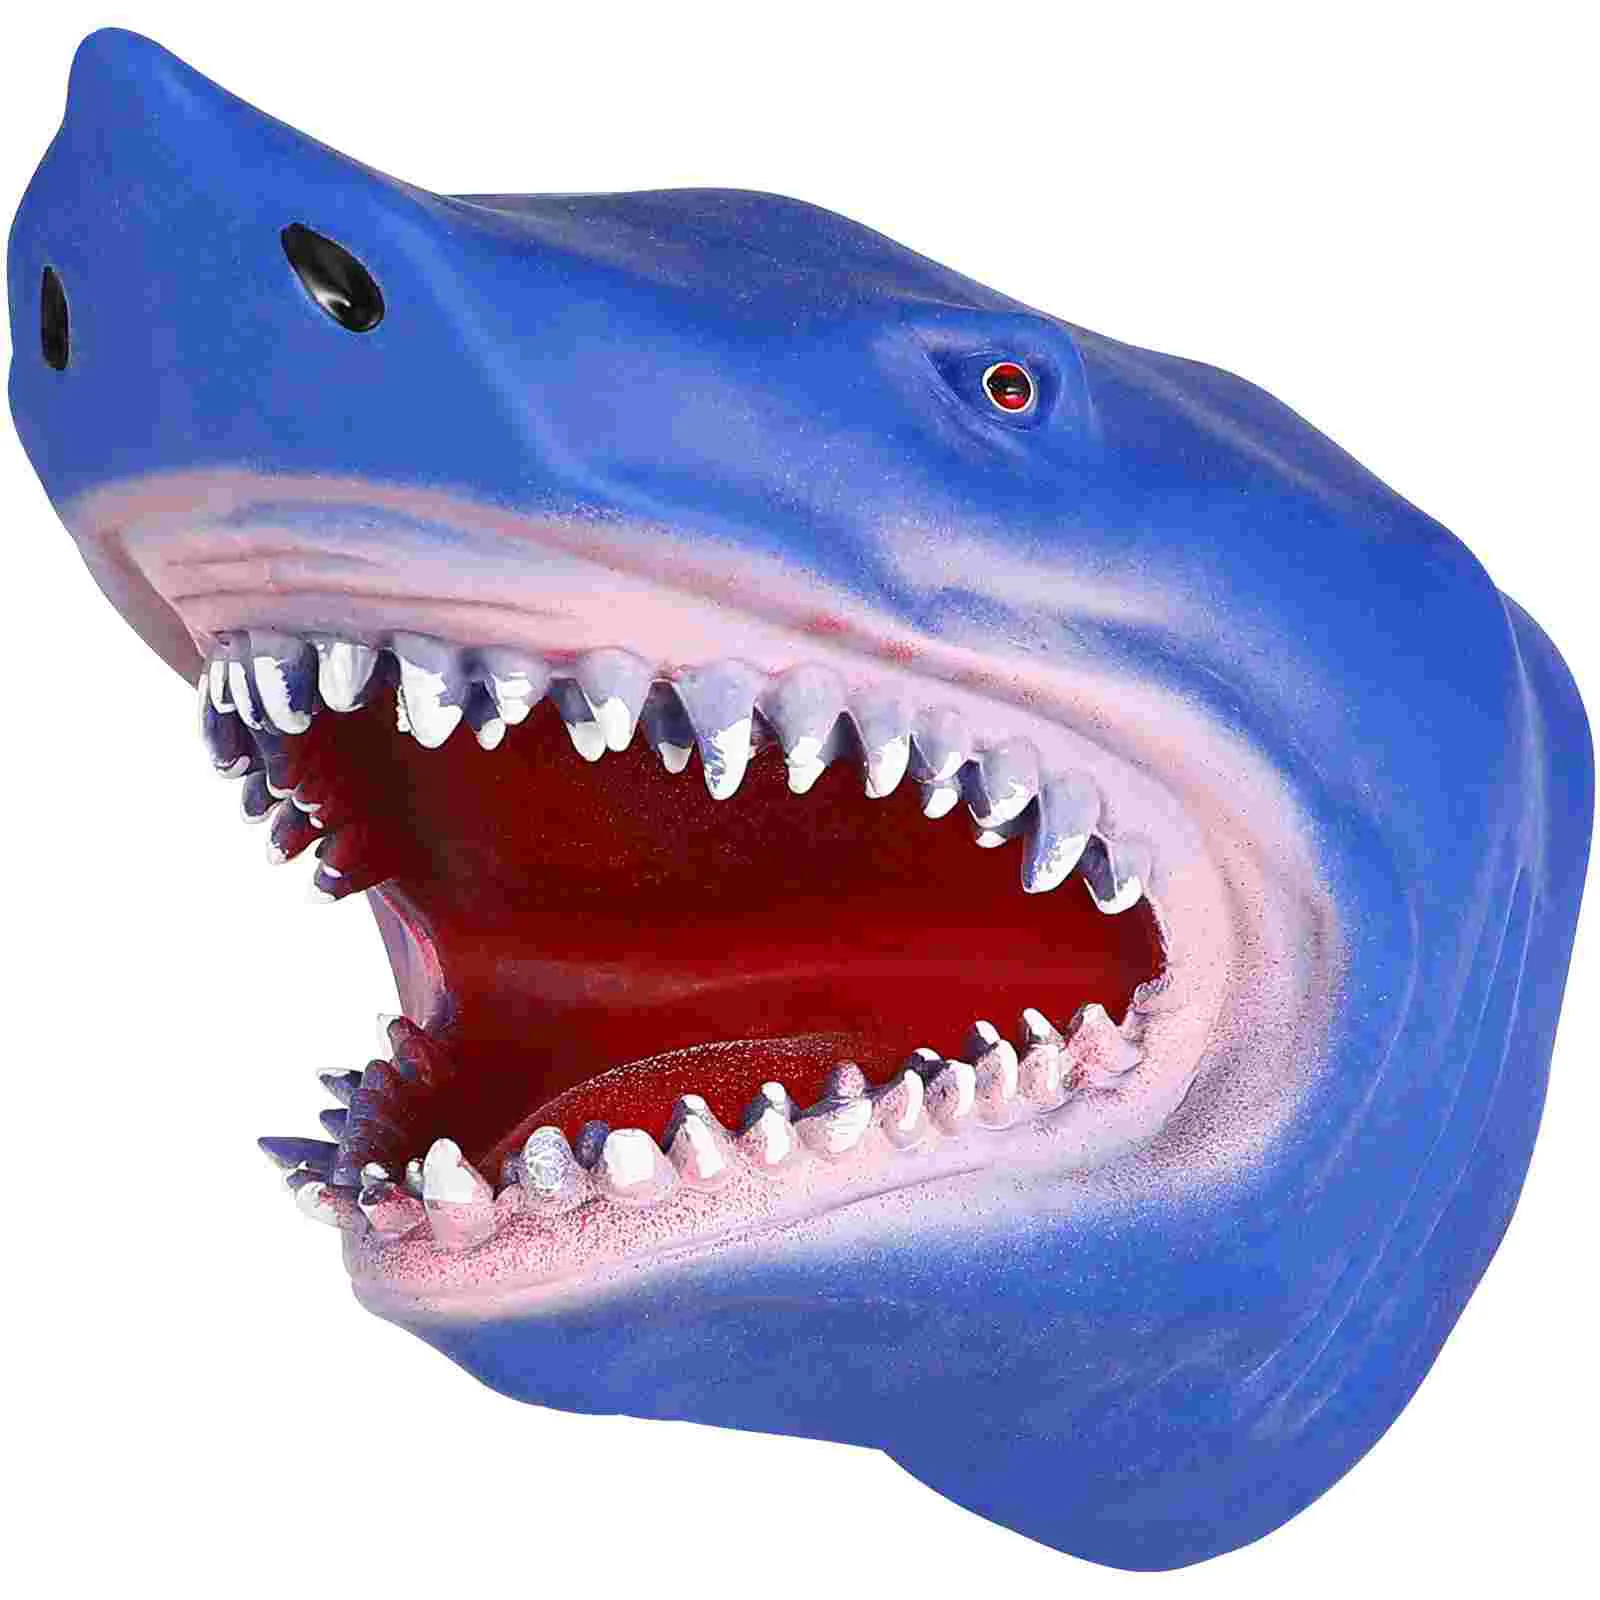 

Hand Puppet Toy Creative Realistic Shark Shaped Glove Storytelling Prop Puppet Gift for Kids Adults